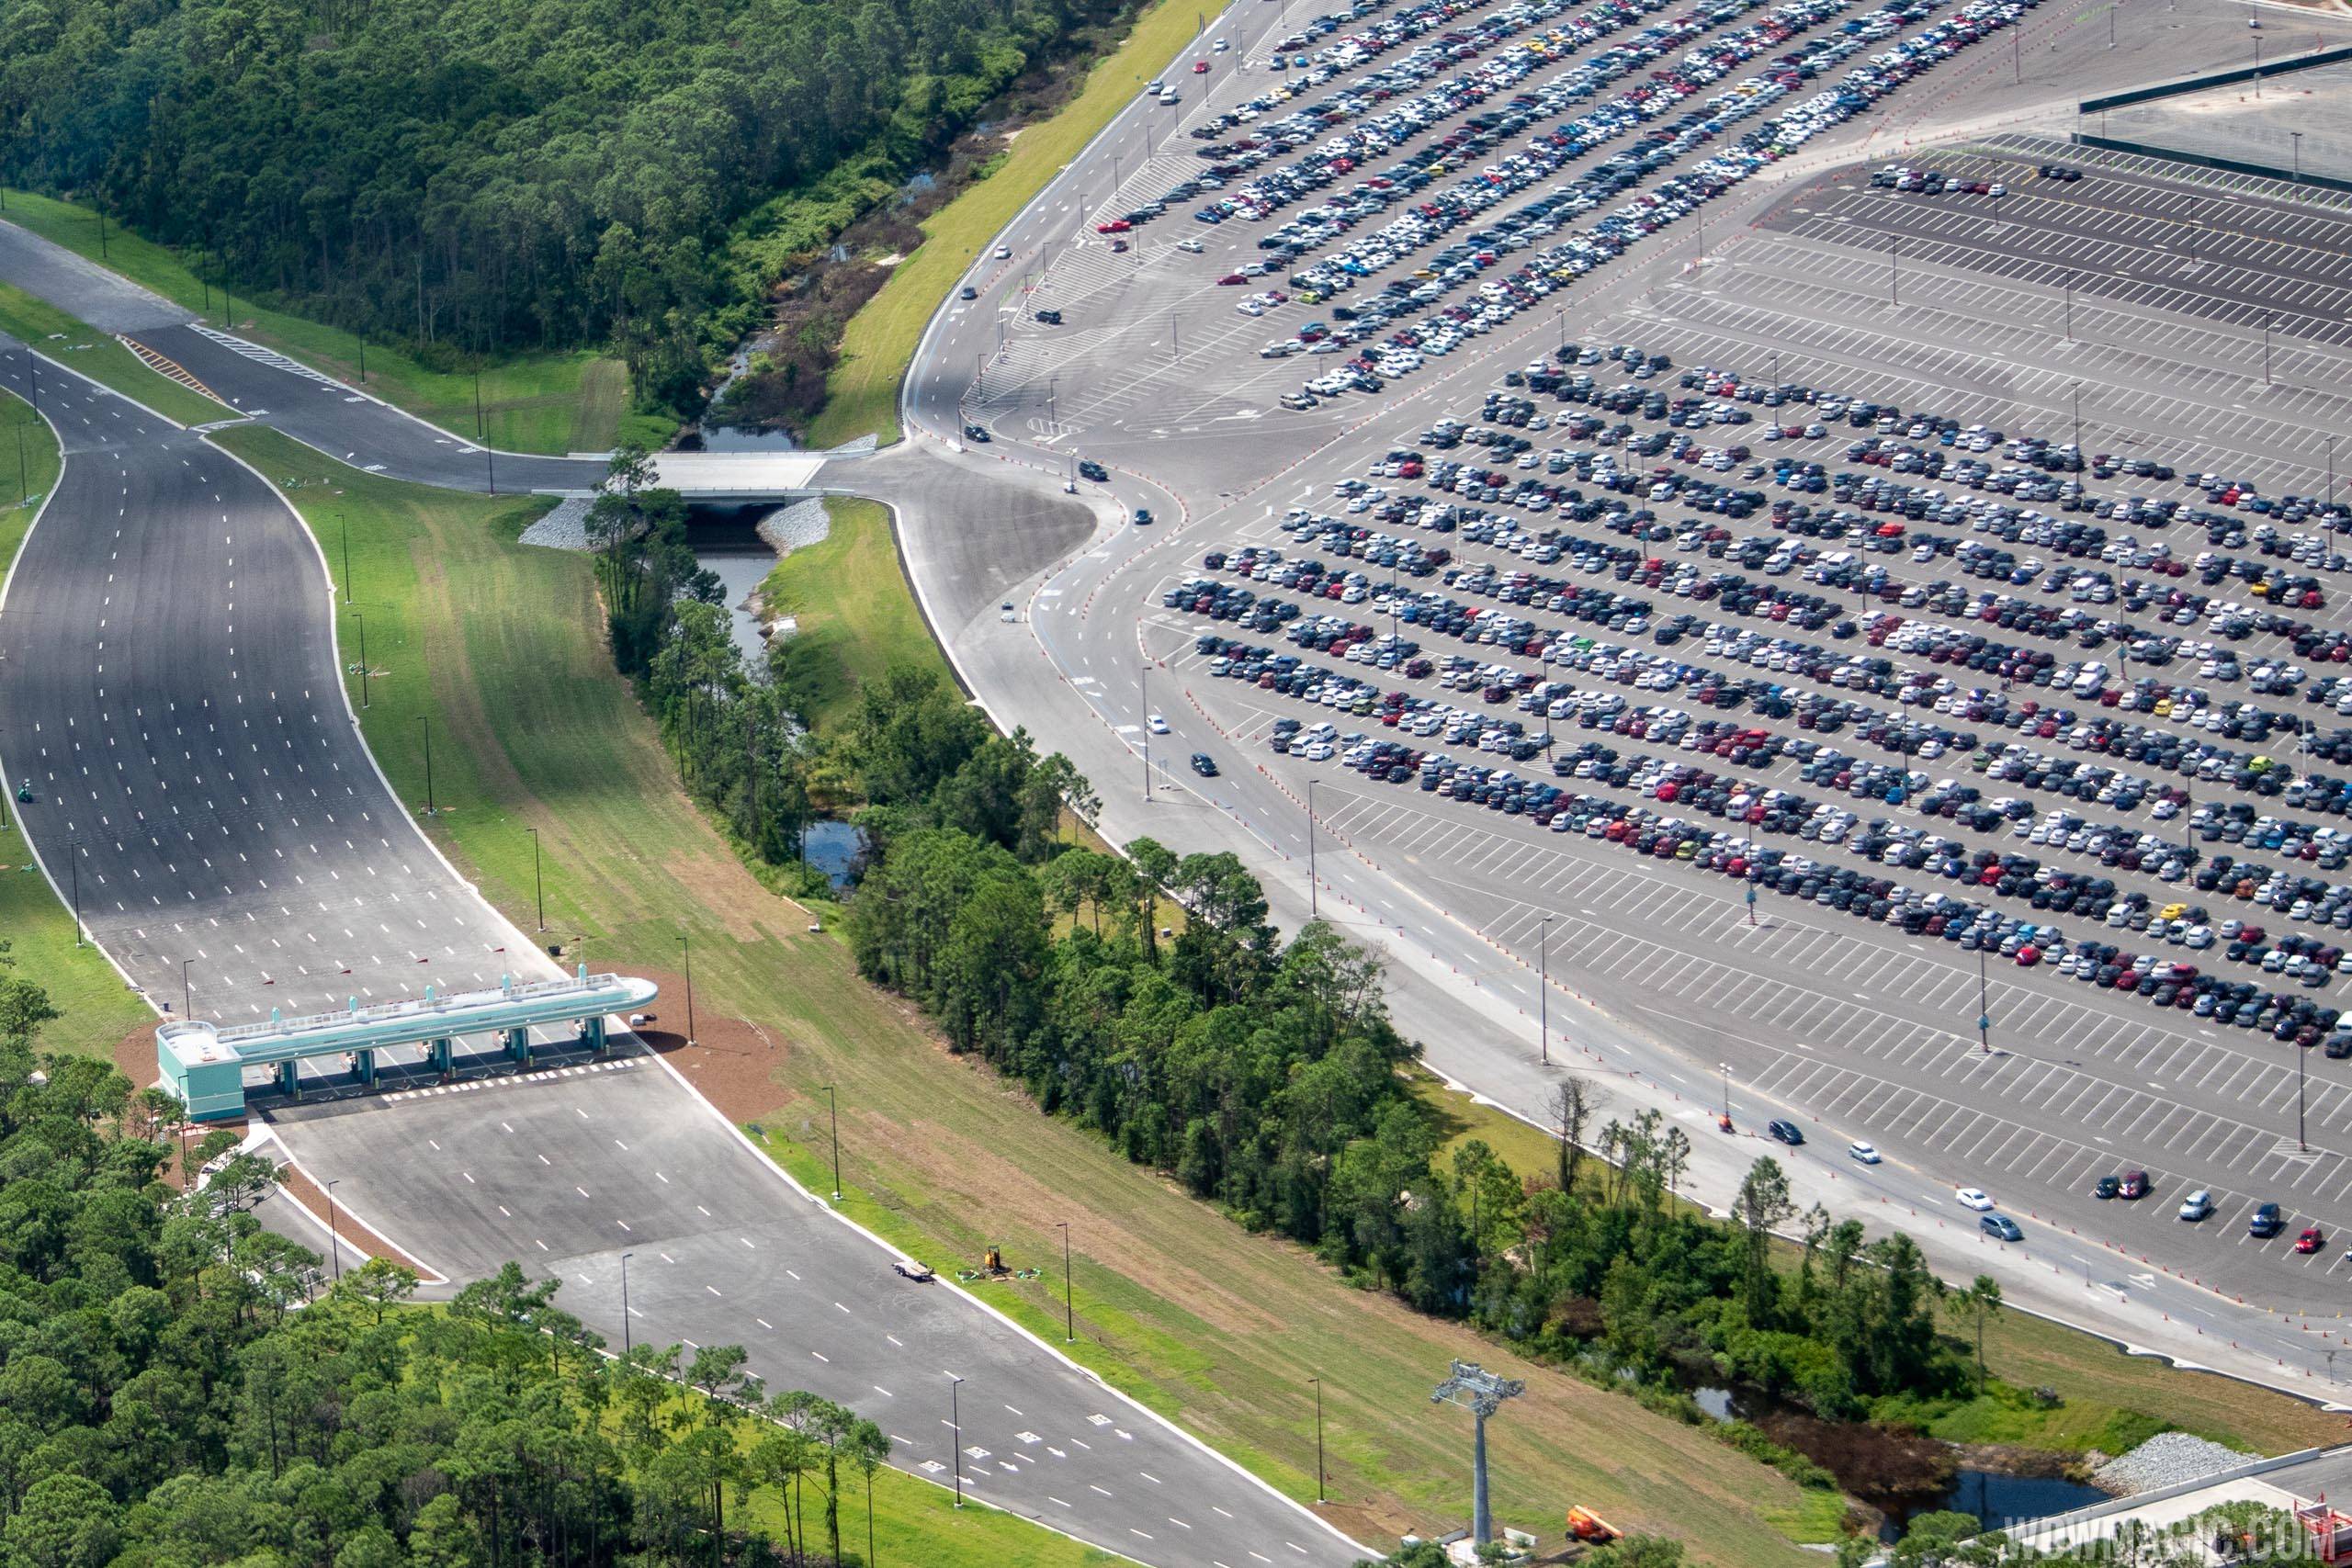 Walt Disney World raises the cost of parking at the theme parks